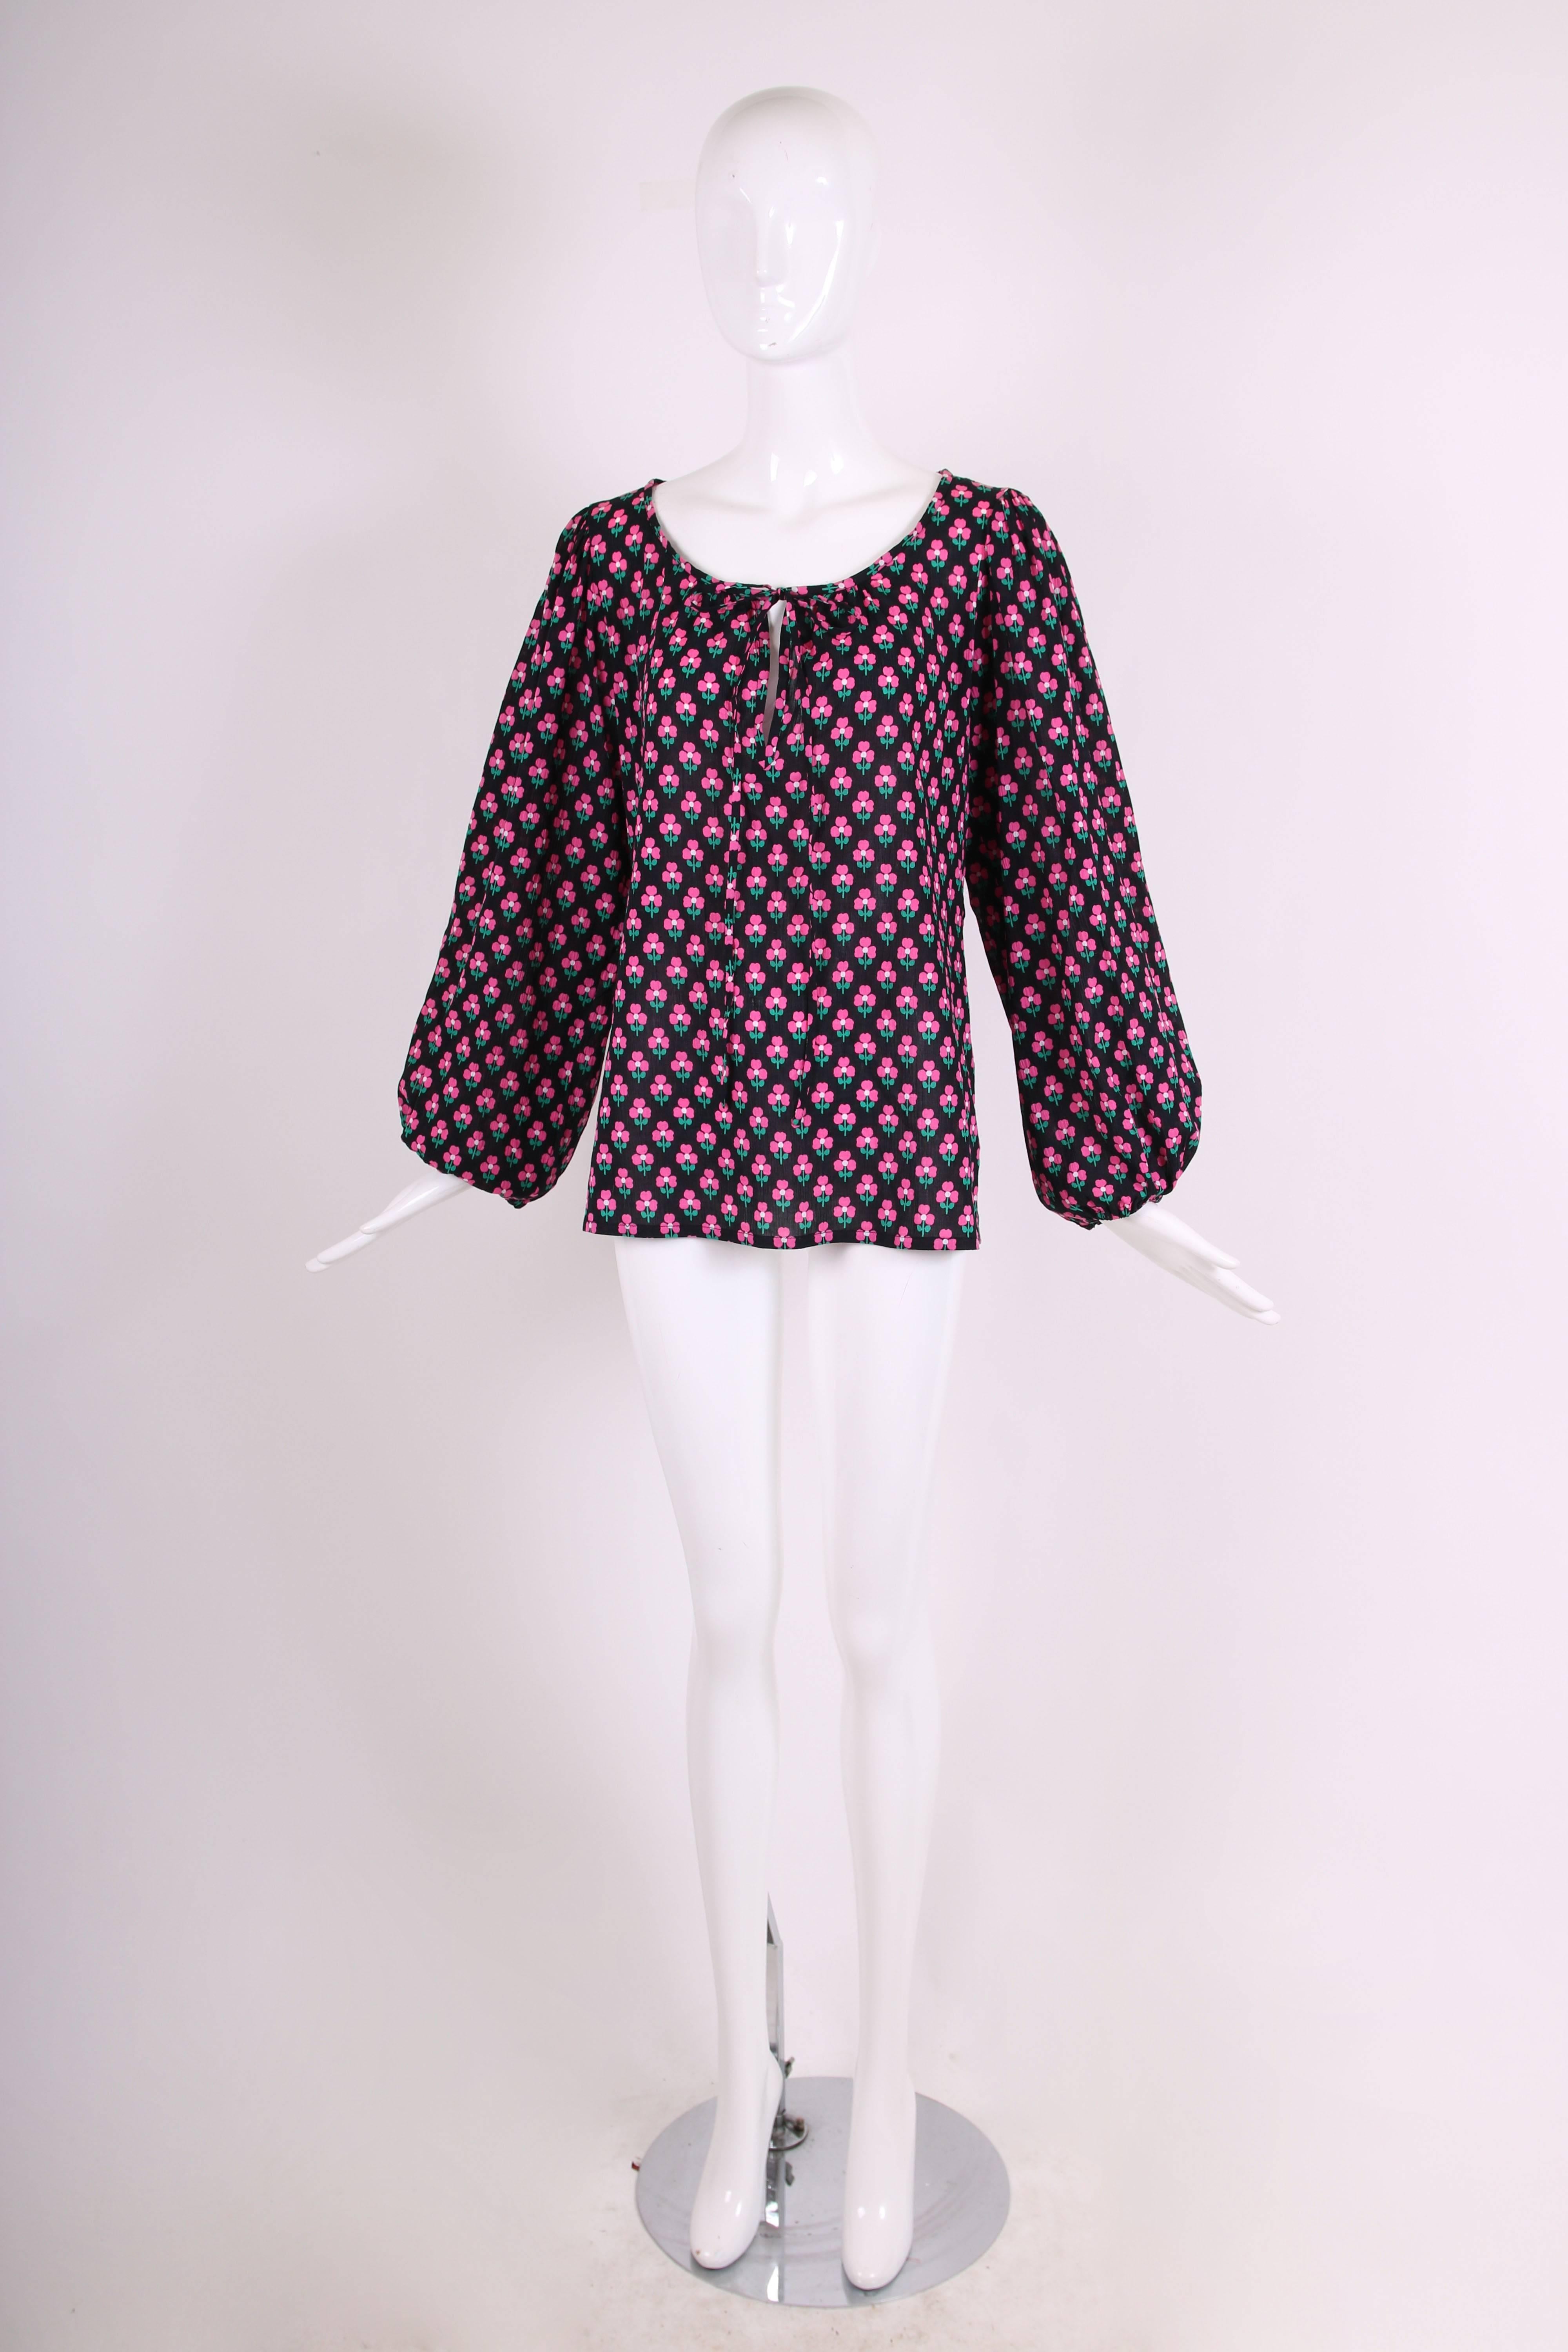 Yves Saint Laurent Pink / Black Clover Print Cotton Peasant Blouse w / Neck Ties In Excellent Condition In Studio City, CA